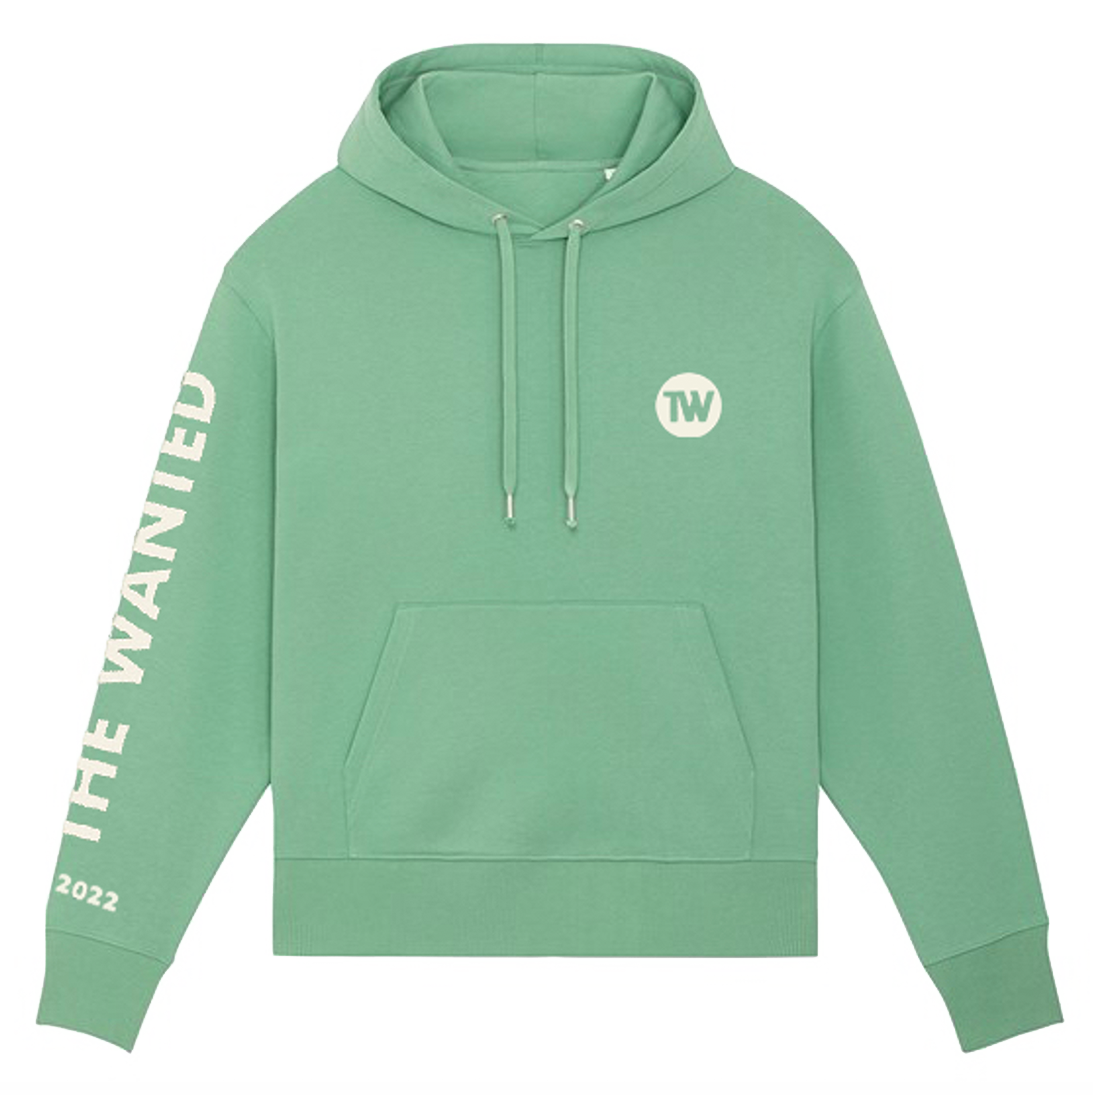 The Wanted - The Wanted 2022 Hoodie